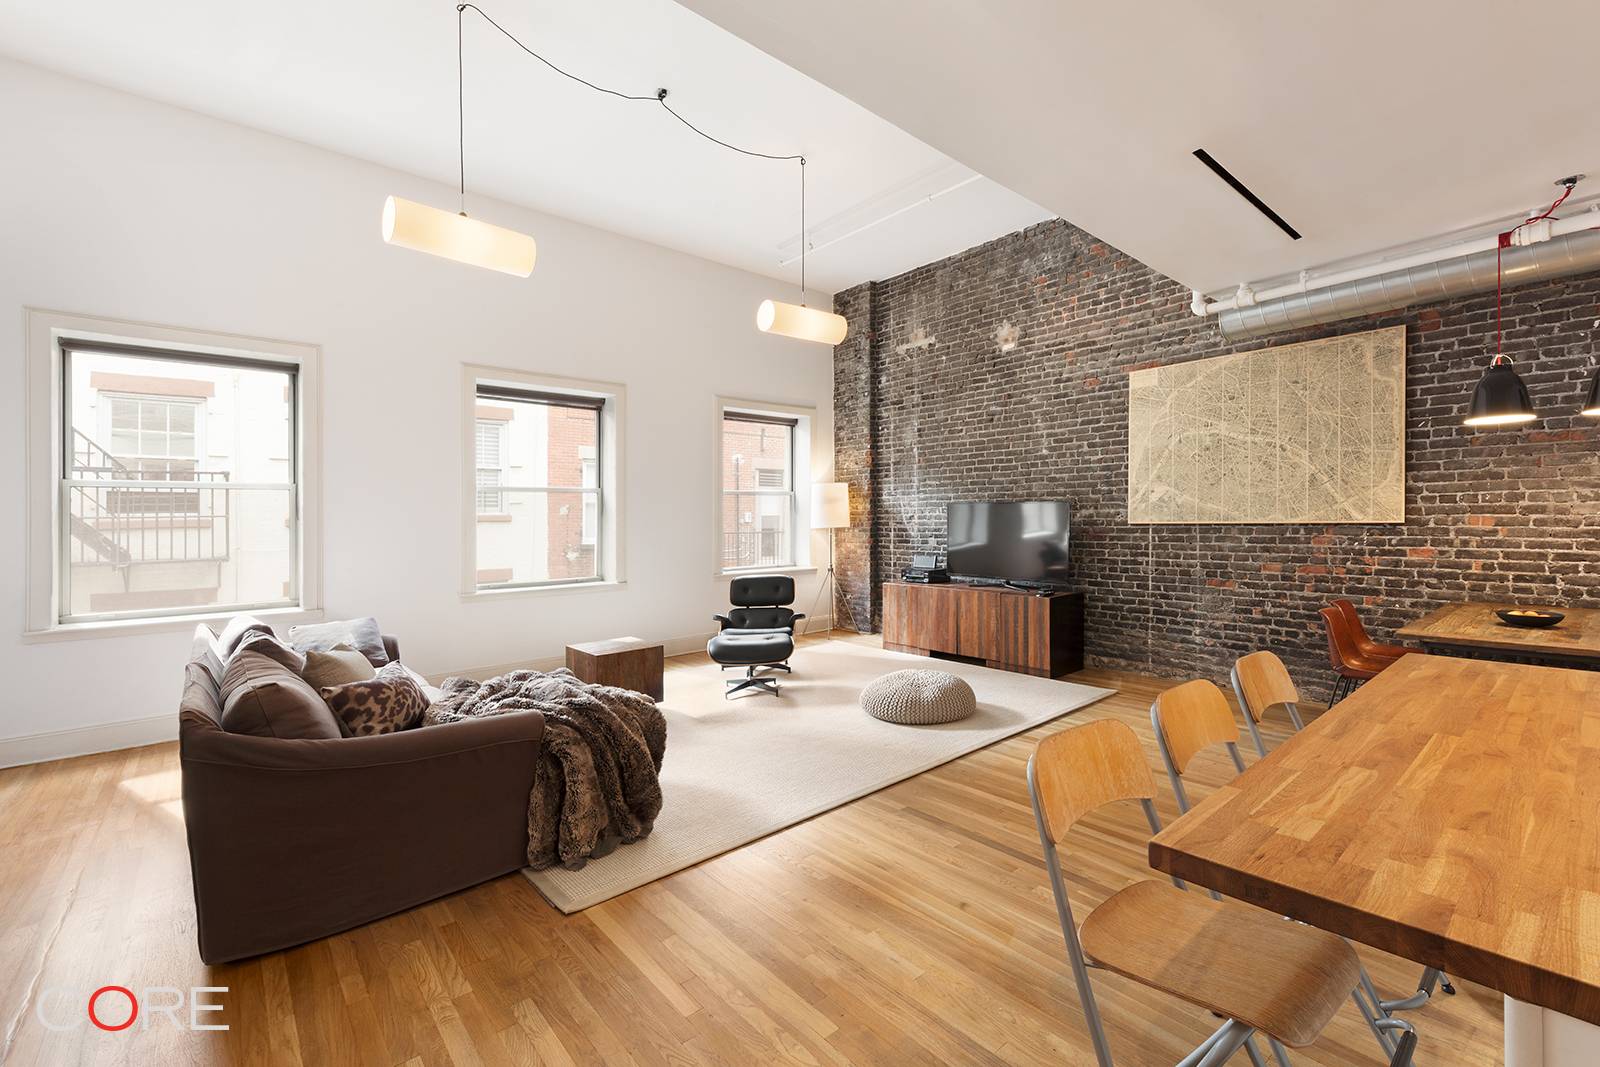 Authentic south facing duplex loft in the heart of Tribeca s historic district with soaring ceilings and oversized windows.